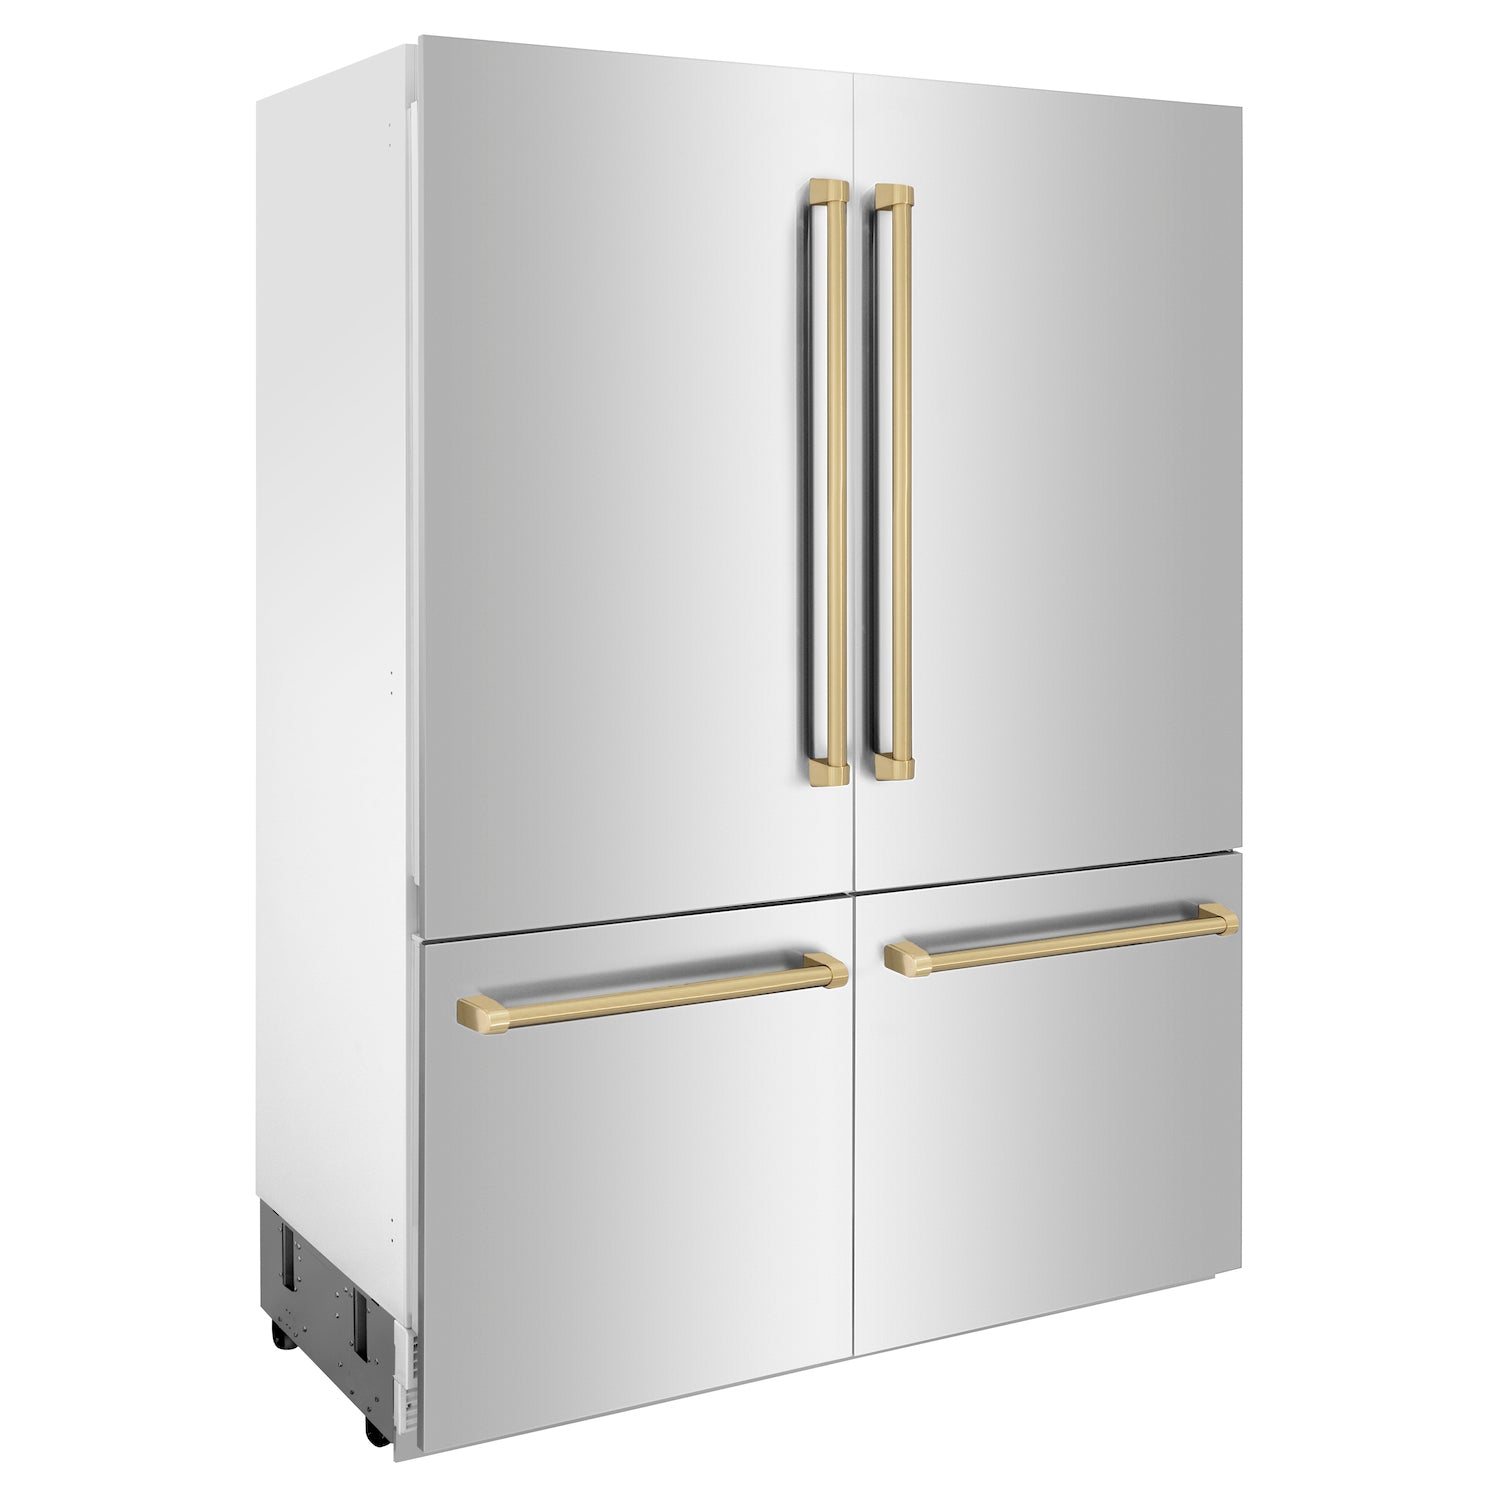 ZLINE Autograph Edition 60 in. 32.2 cu. ft. Built-in 4-Door French Door Refrigerator with Internal Water and Ice Dispenser in Stainless Steel with Champagne Bronze Accents (RBIVZ-304-60-CB) side, closed.